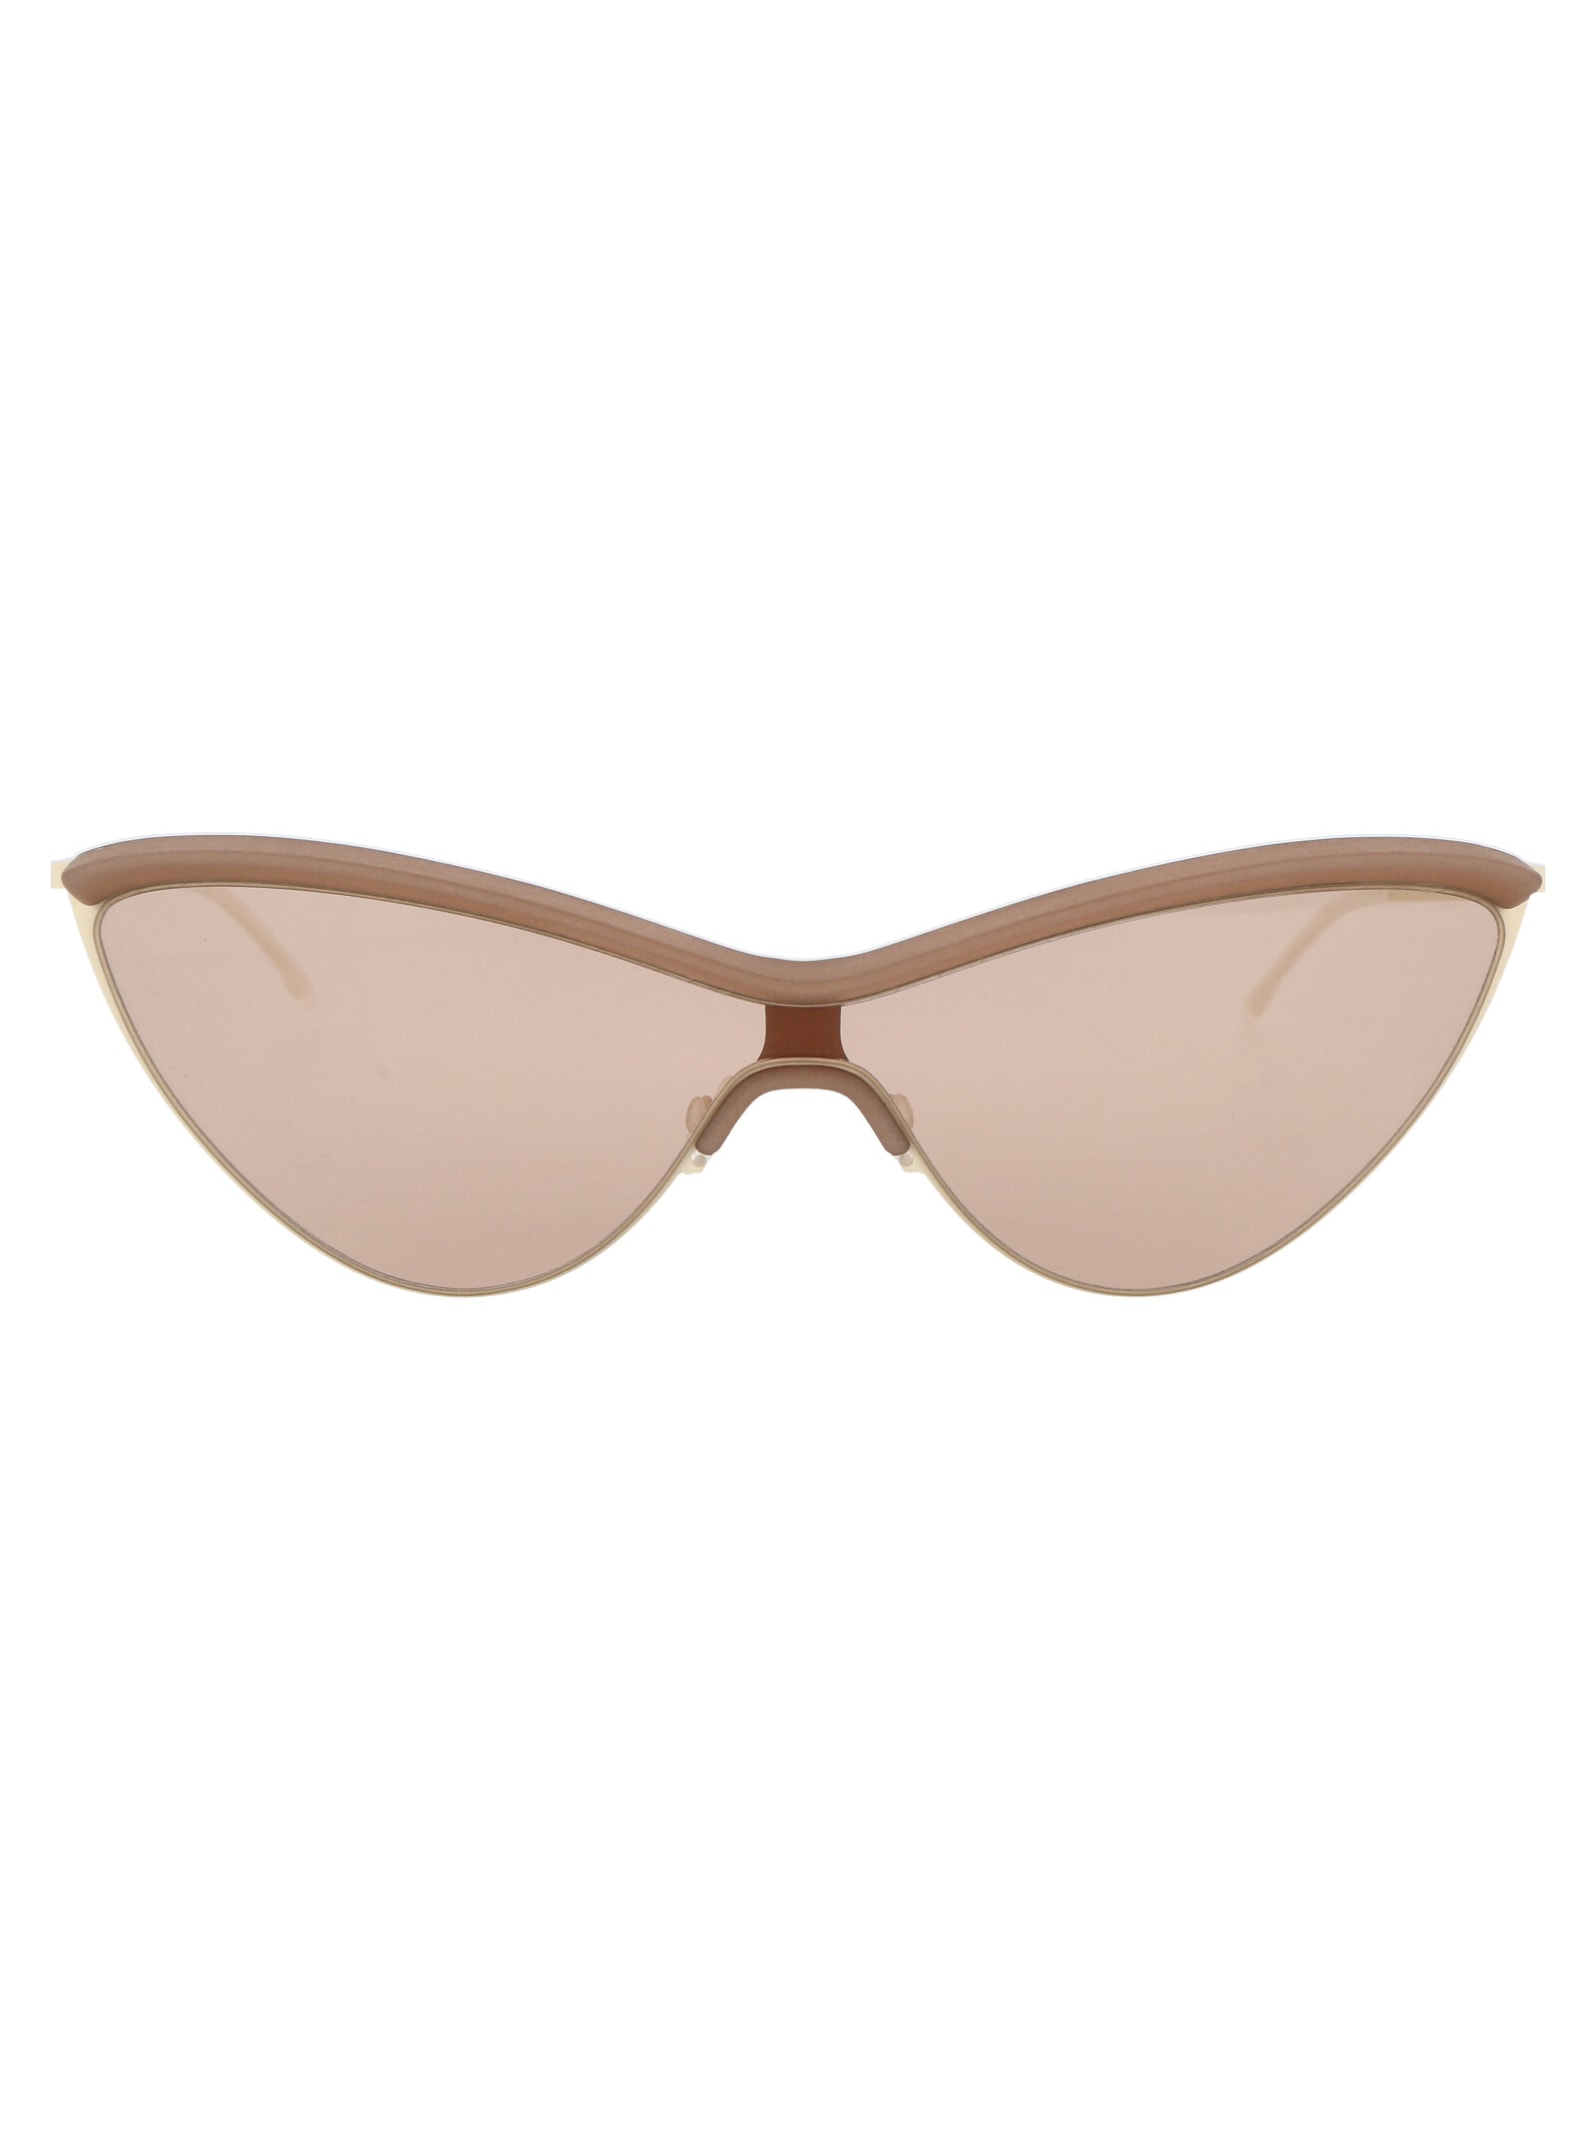 Shop Mykita Mmecho002 Sunglasses In 350 Mh21 Nude Off White Nude Solid Shield